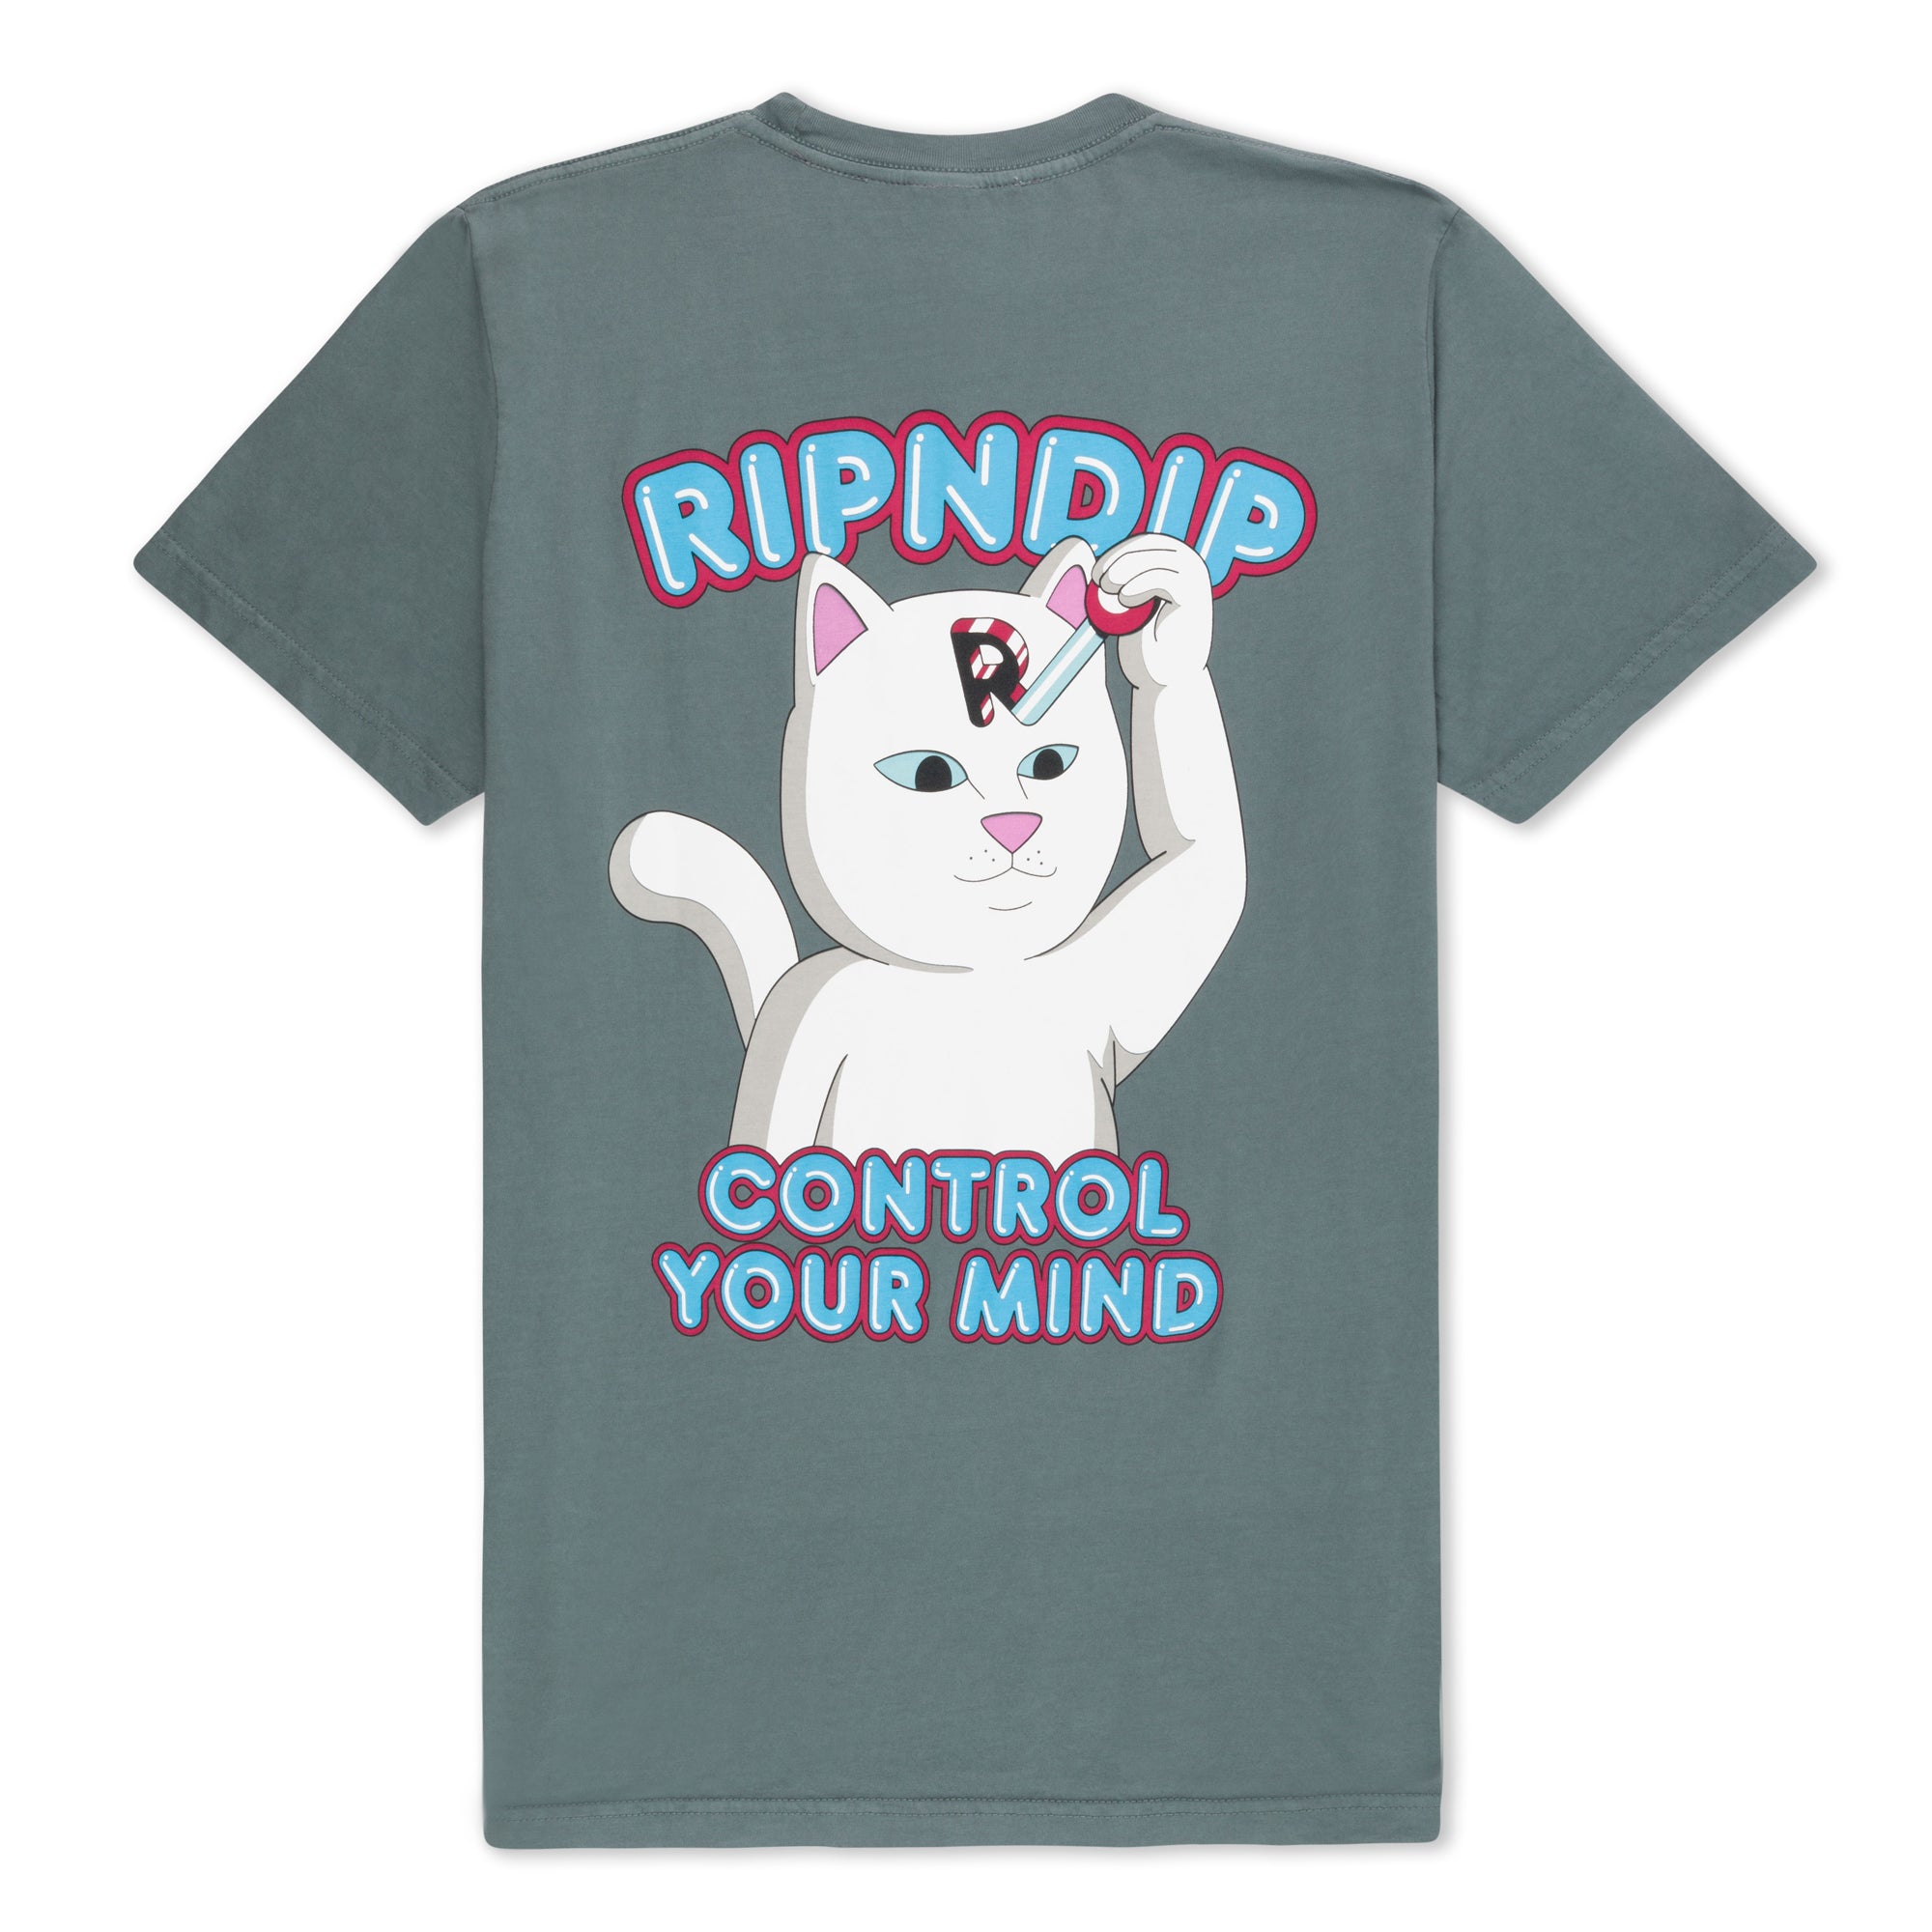 RIPNDIP Control Your Mind Tee (Charcoal)